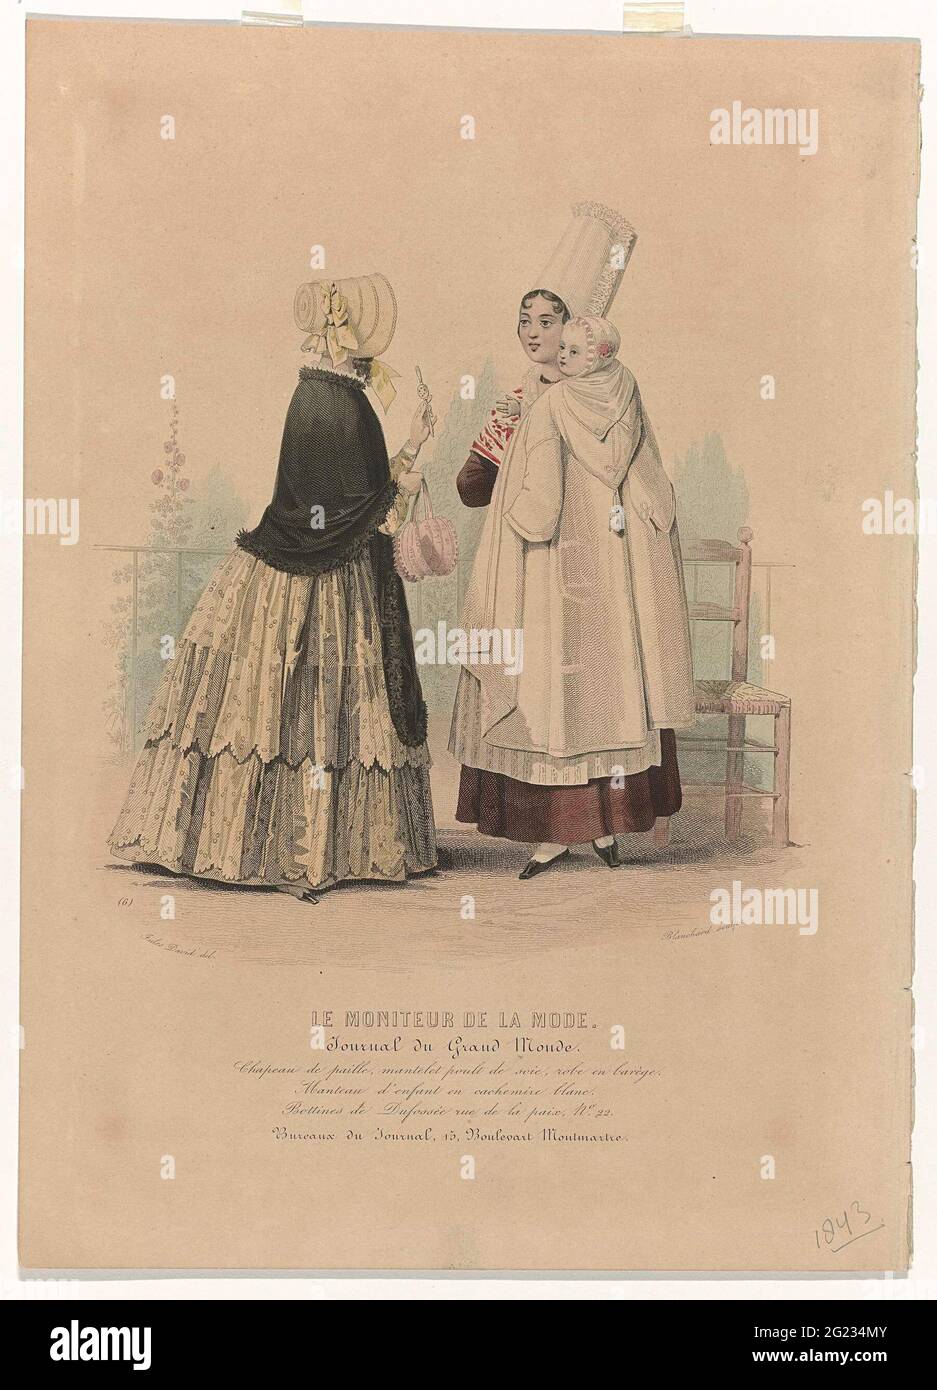 Le Moniteur de la Mode, 1843, no. 6: Chapeau de Paill (...). Woman with a  ratchet and children's hat in hand, standing at a woman with a baby on the  arm. According